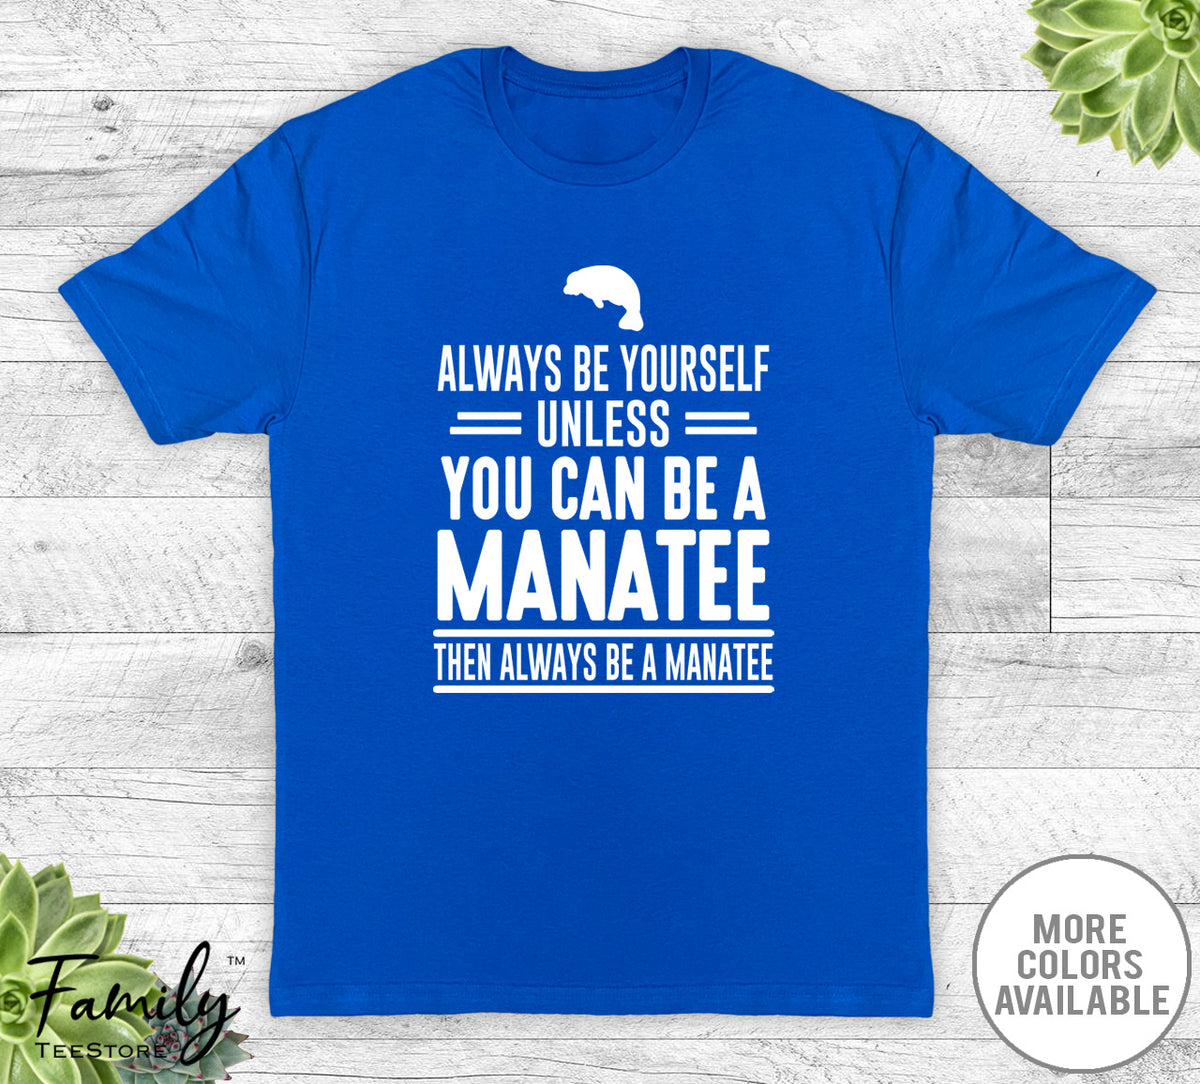 Always Be Yourself Unless You Can Be A Manatee - Unisex T-shirt - Manatee Shirt - Manatee Gift - familyteeprints